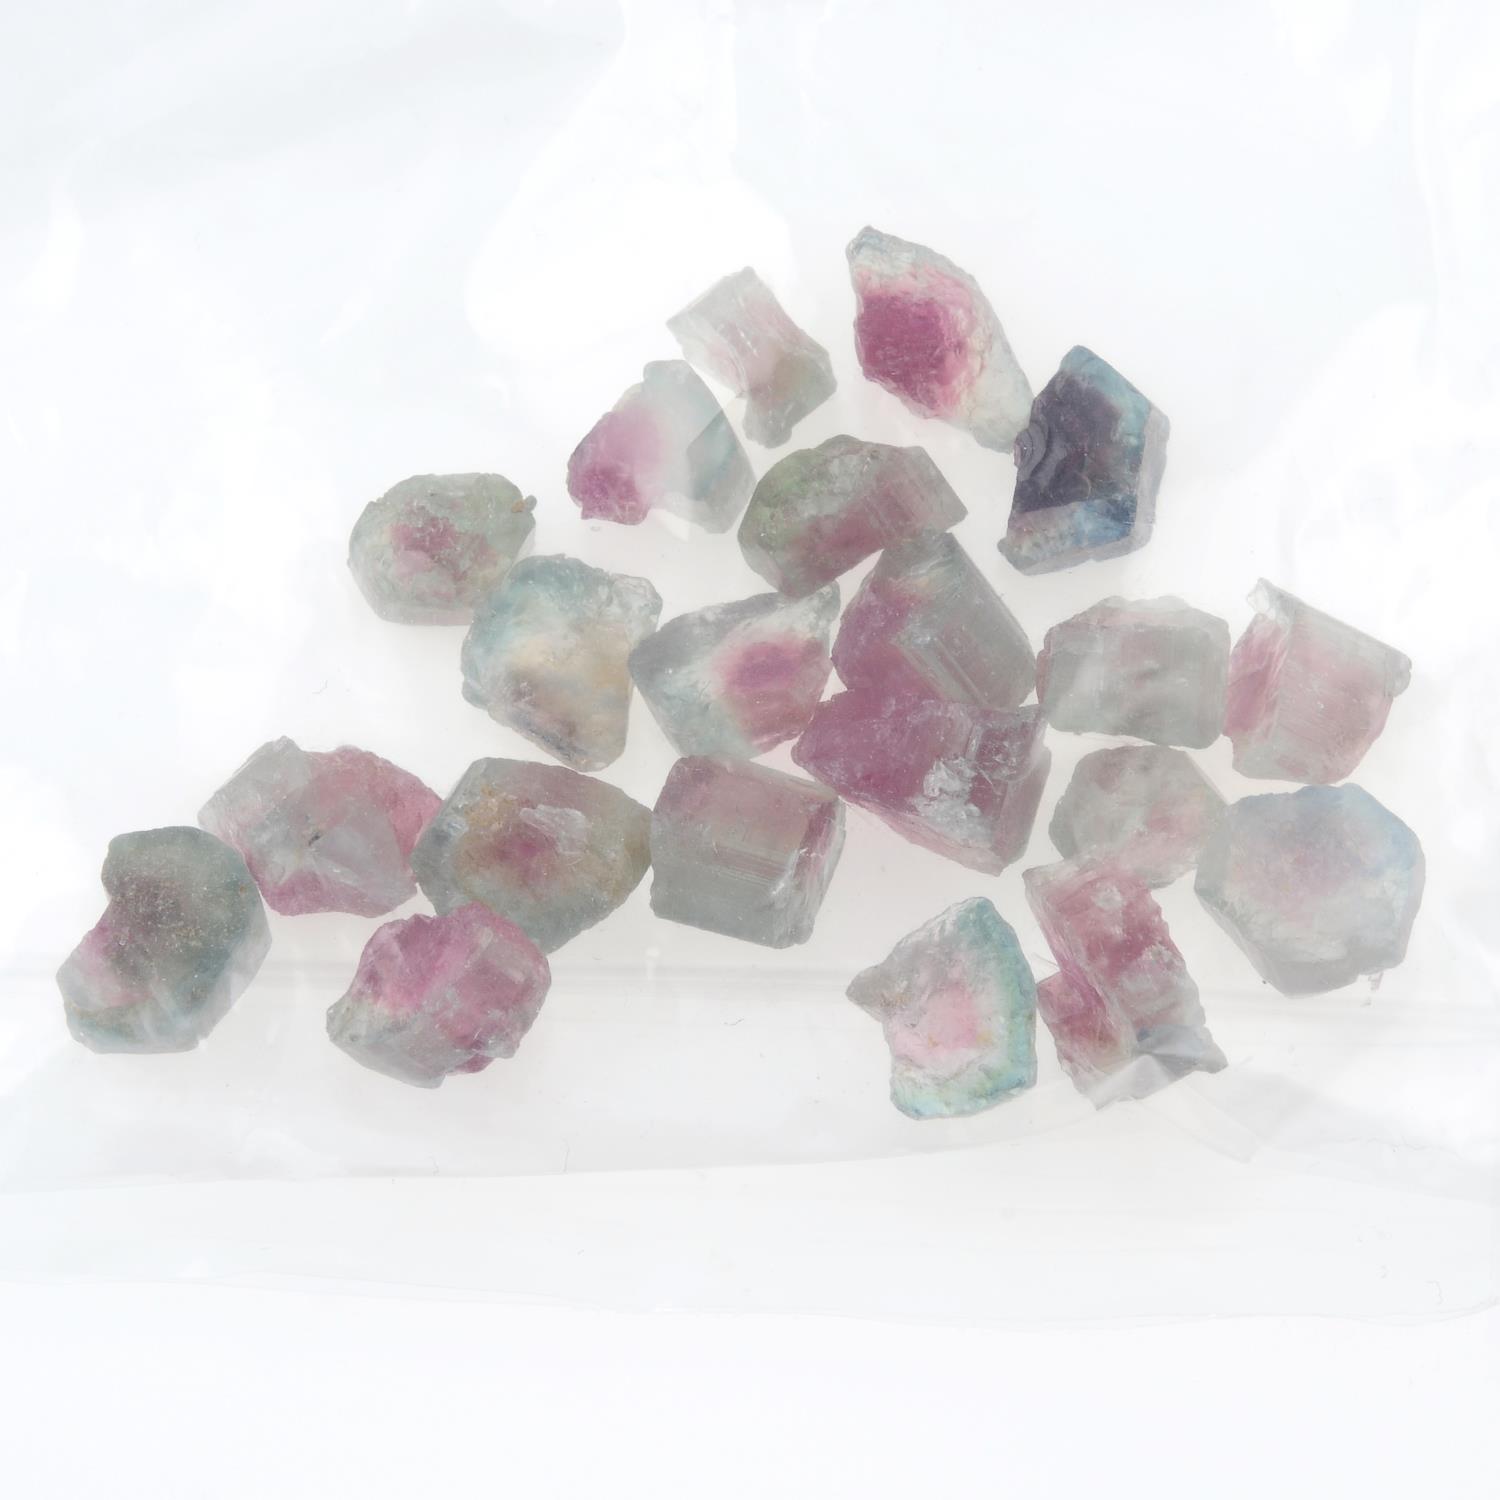 A selection of rough tourmalines. - Image 2 of 2